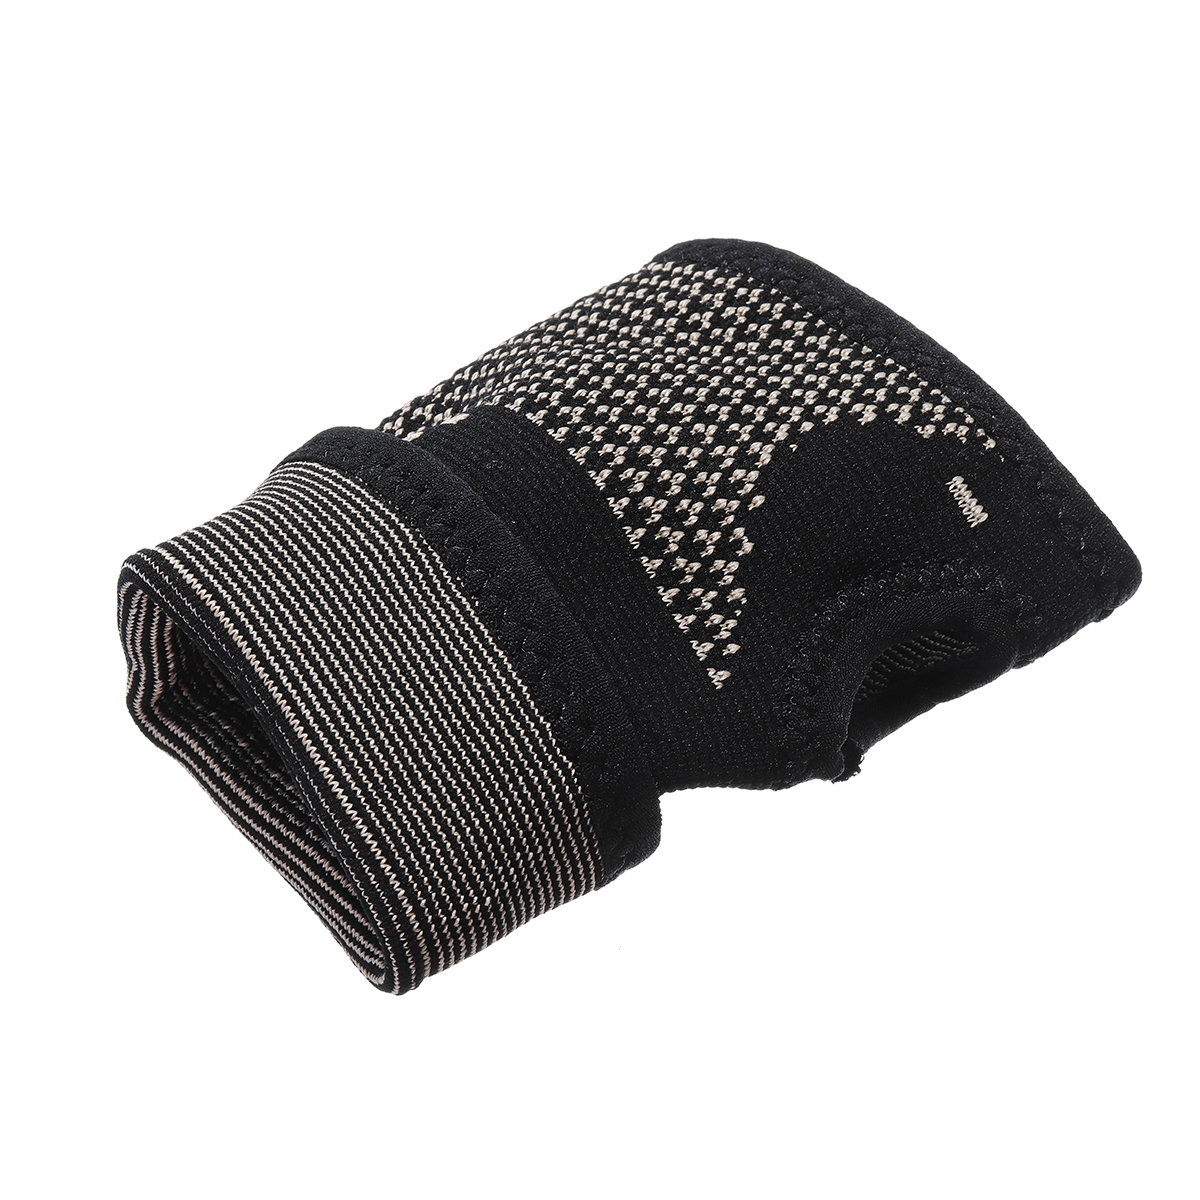 KALOAD-1PC-Copper-Infused-Wrist-Sleeve-Palm-Hand-Support-Outdoor-Sports-Bracer-Support-Fitness-Prote-1429972-8